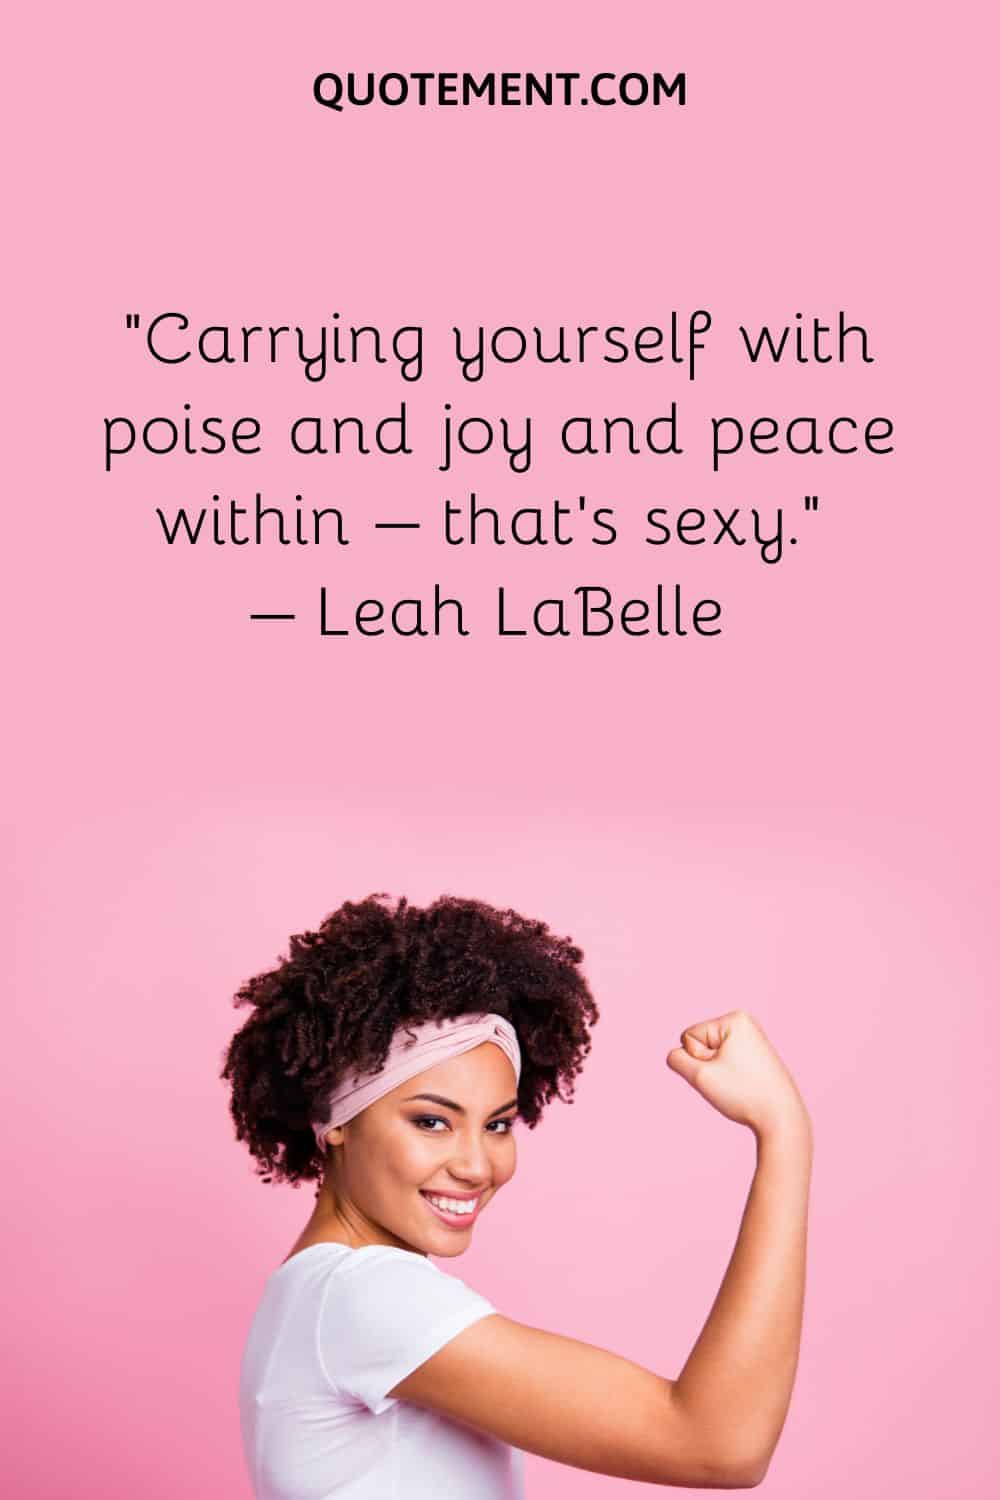 Carrying yourself with poise and joy and peace within – that’s sexy